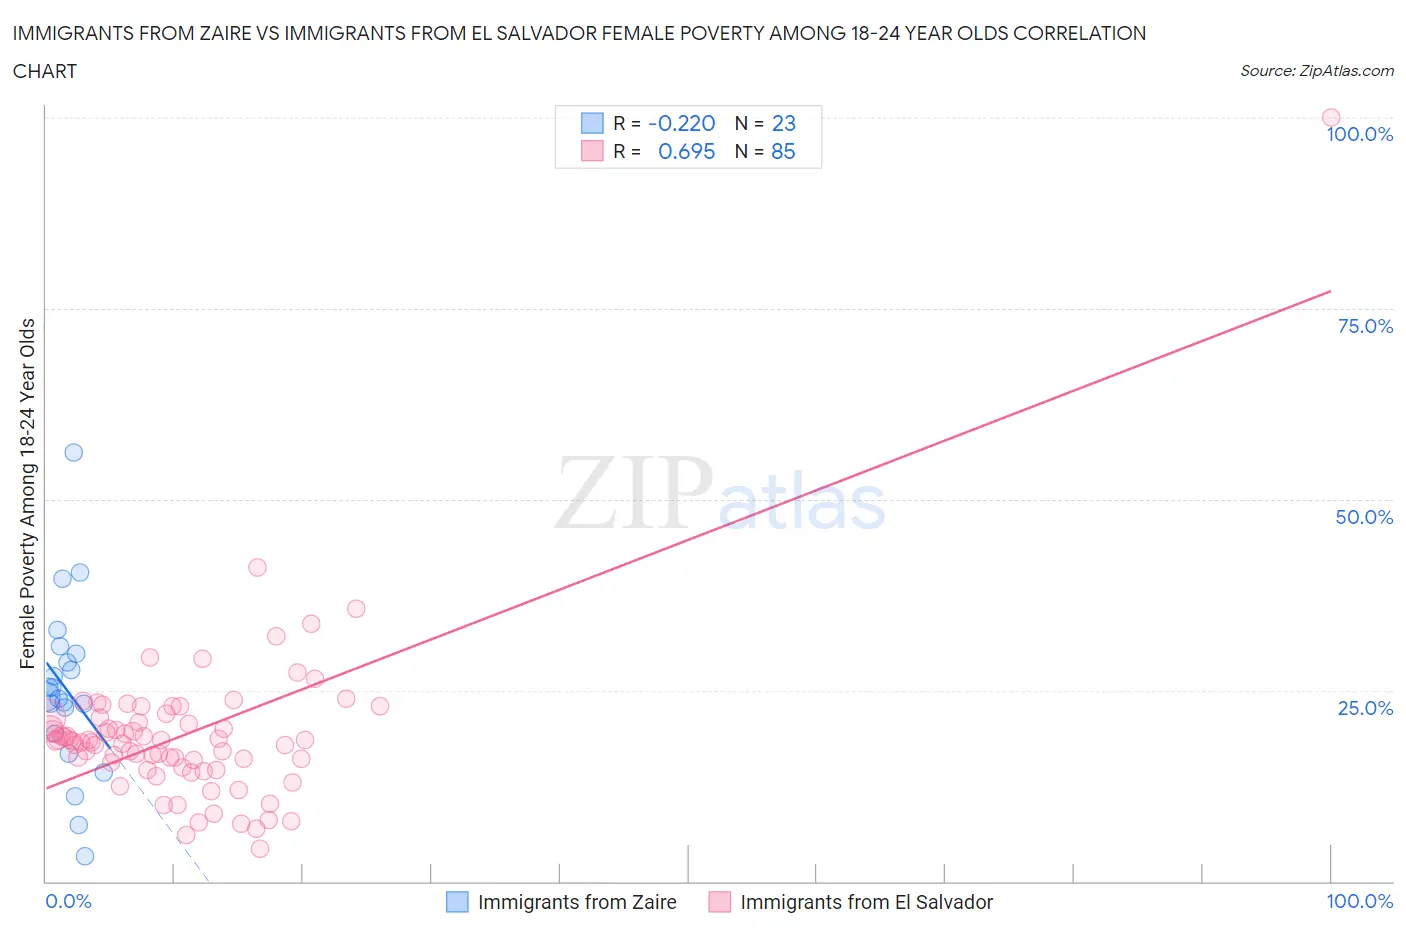 Immigrants from Zaire vs Immigrants from El Salvador Female Poverty Among 18-24 Year Olds